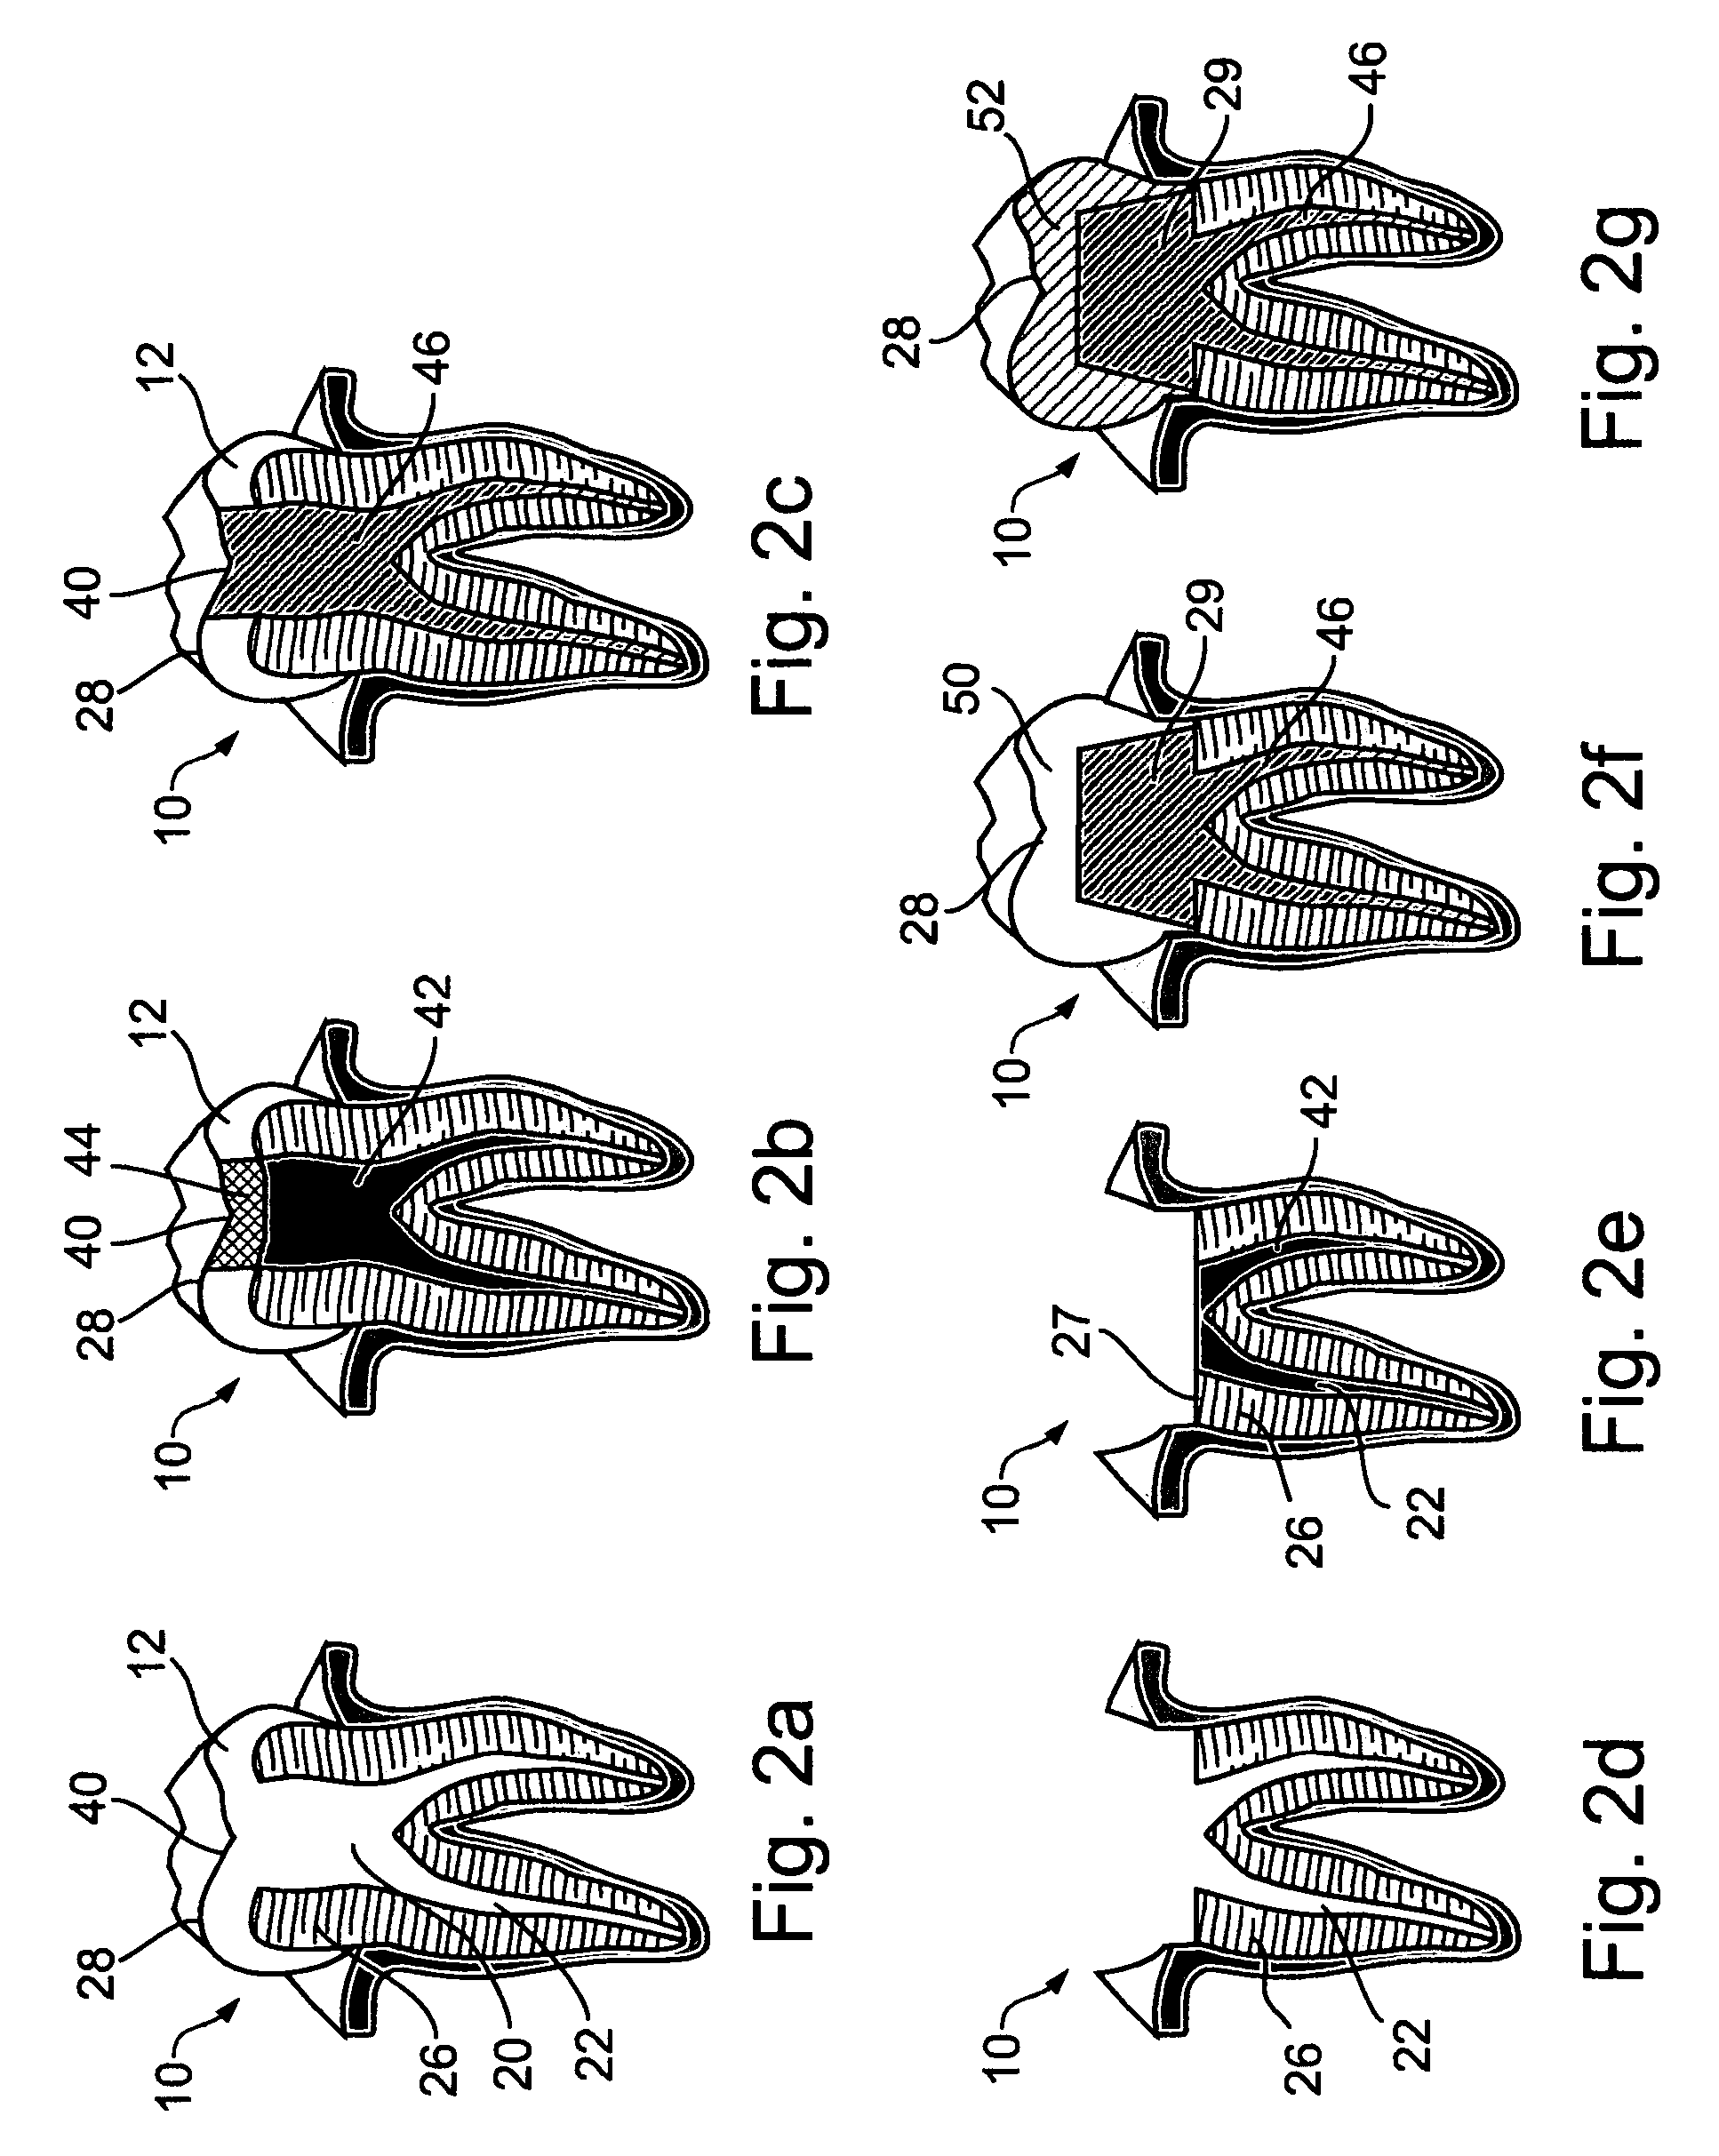 Oral devices and methods for controlled drug release